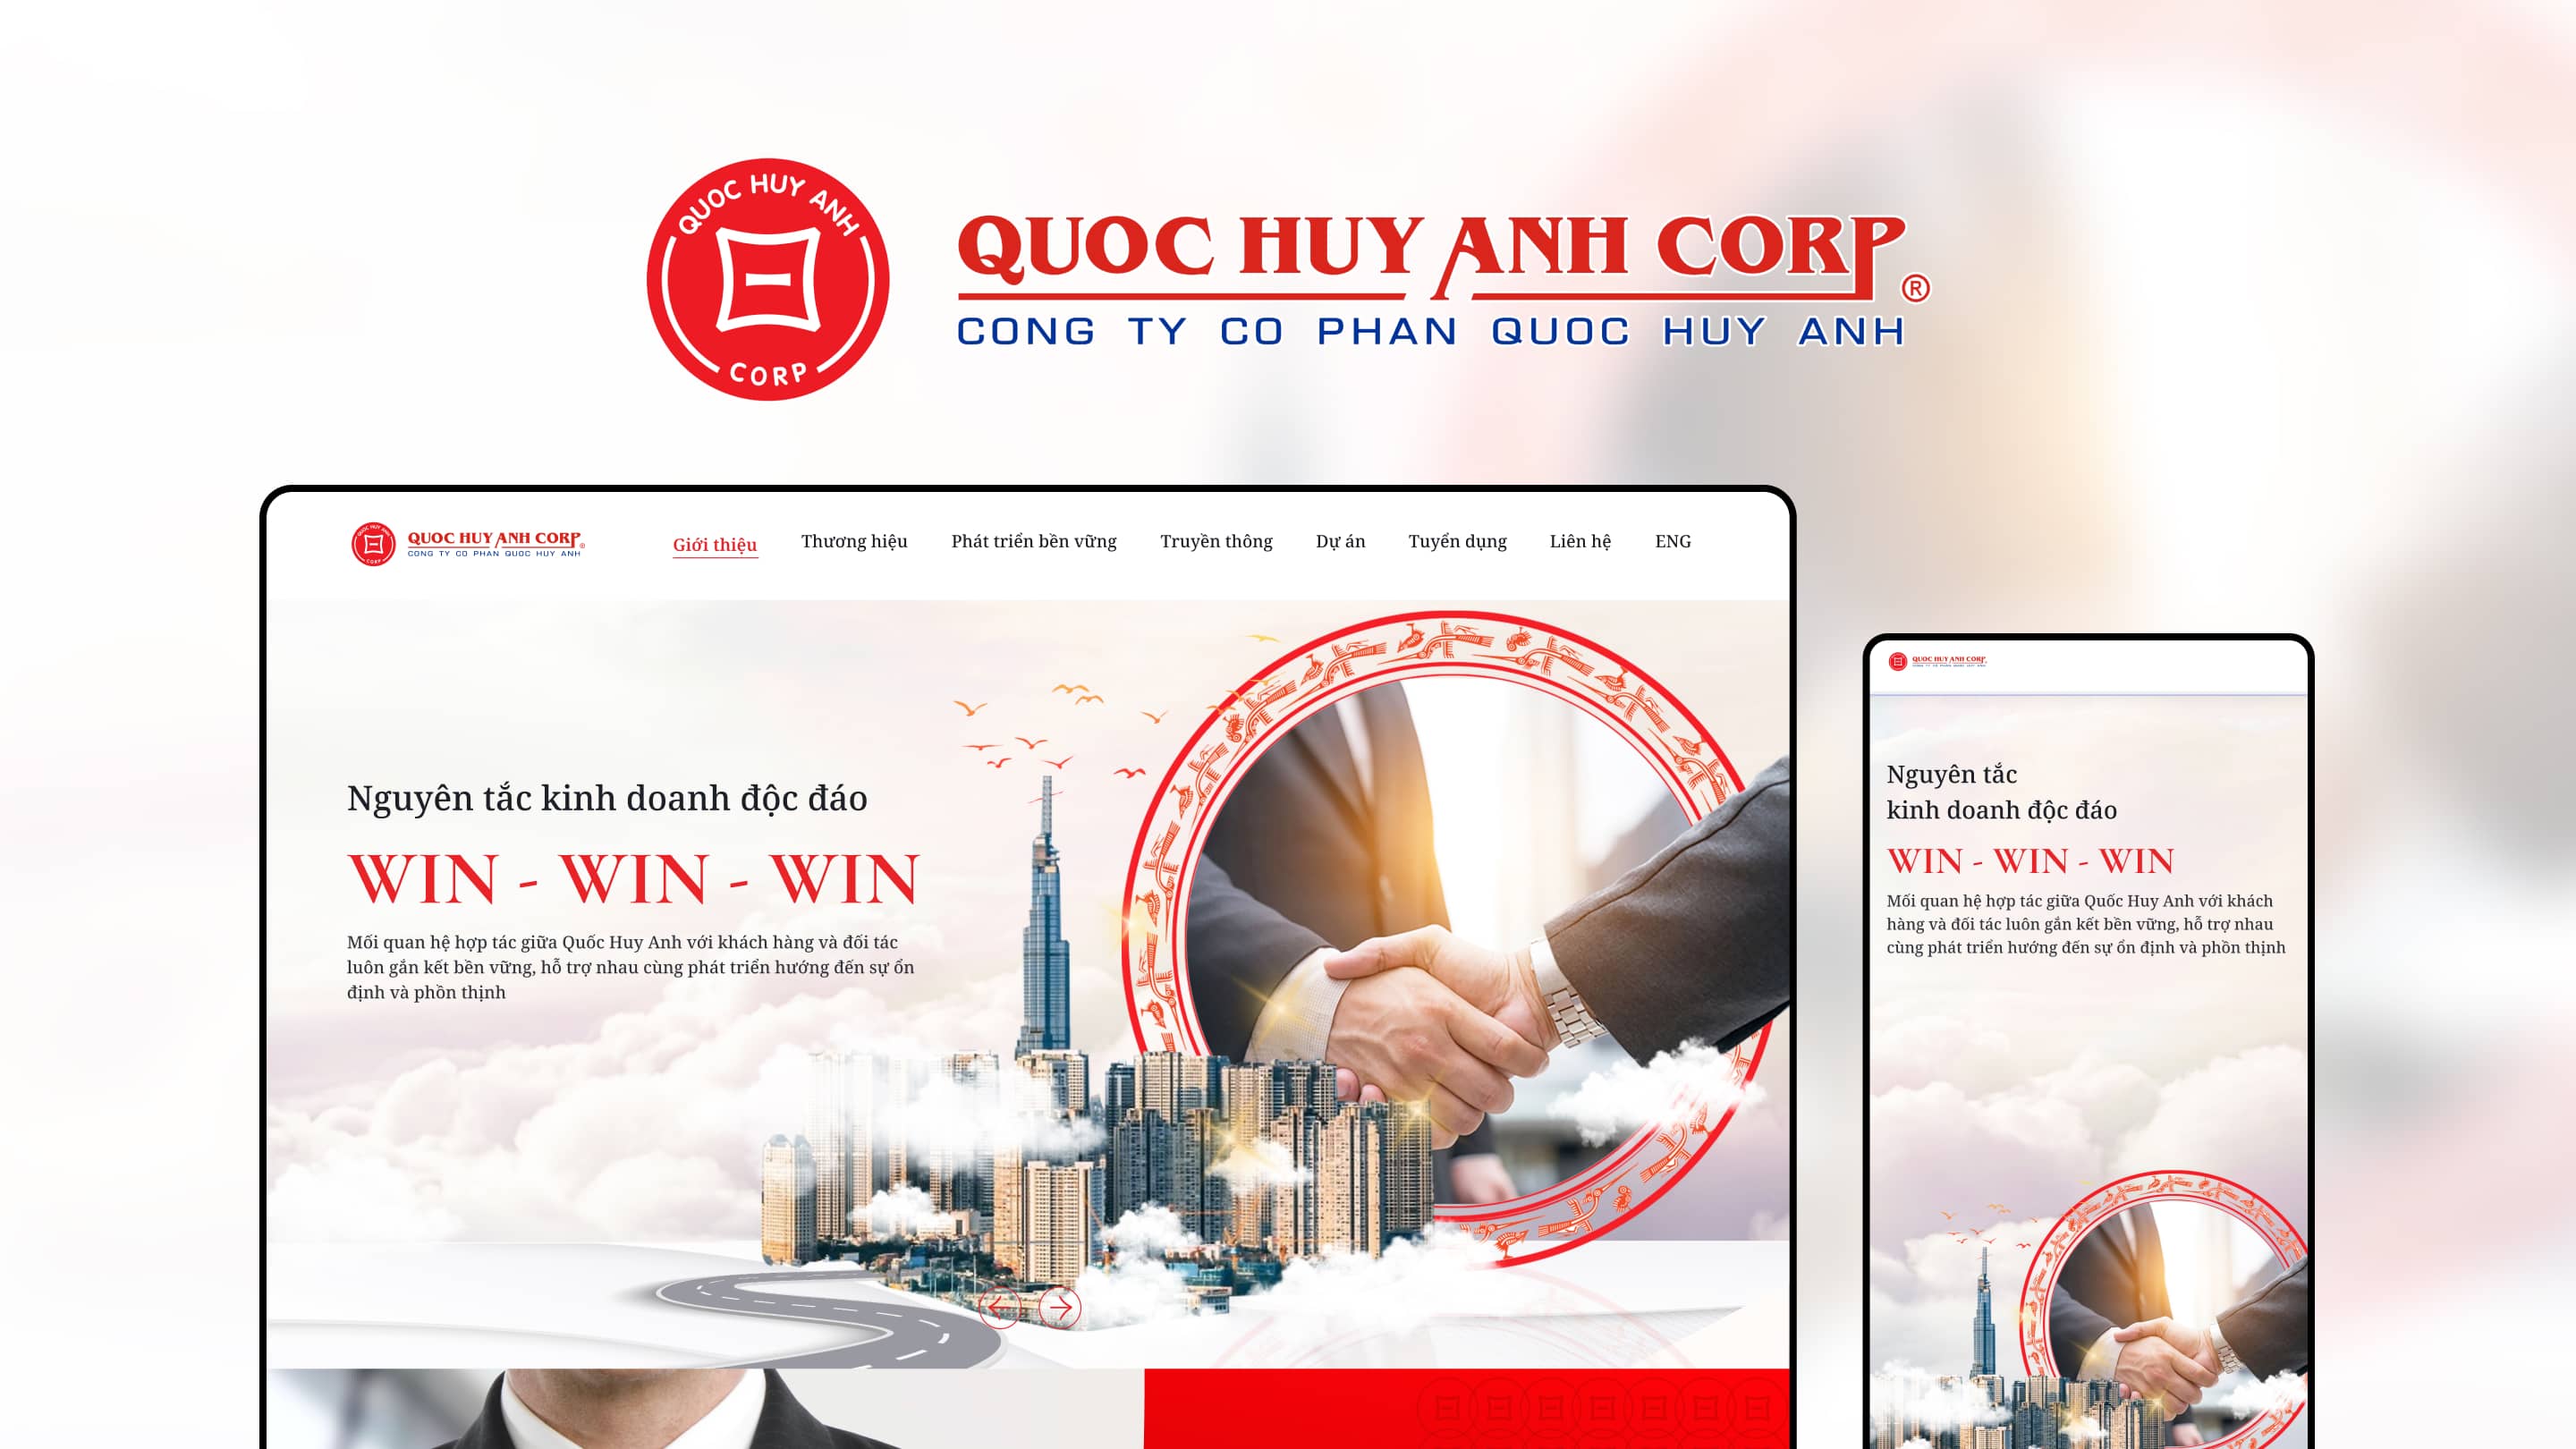 quochuy-anh-corp